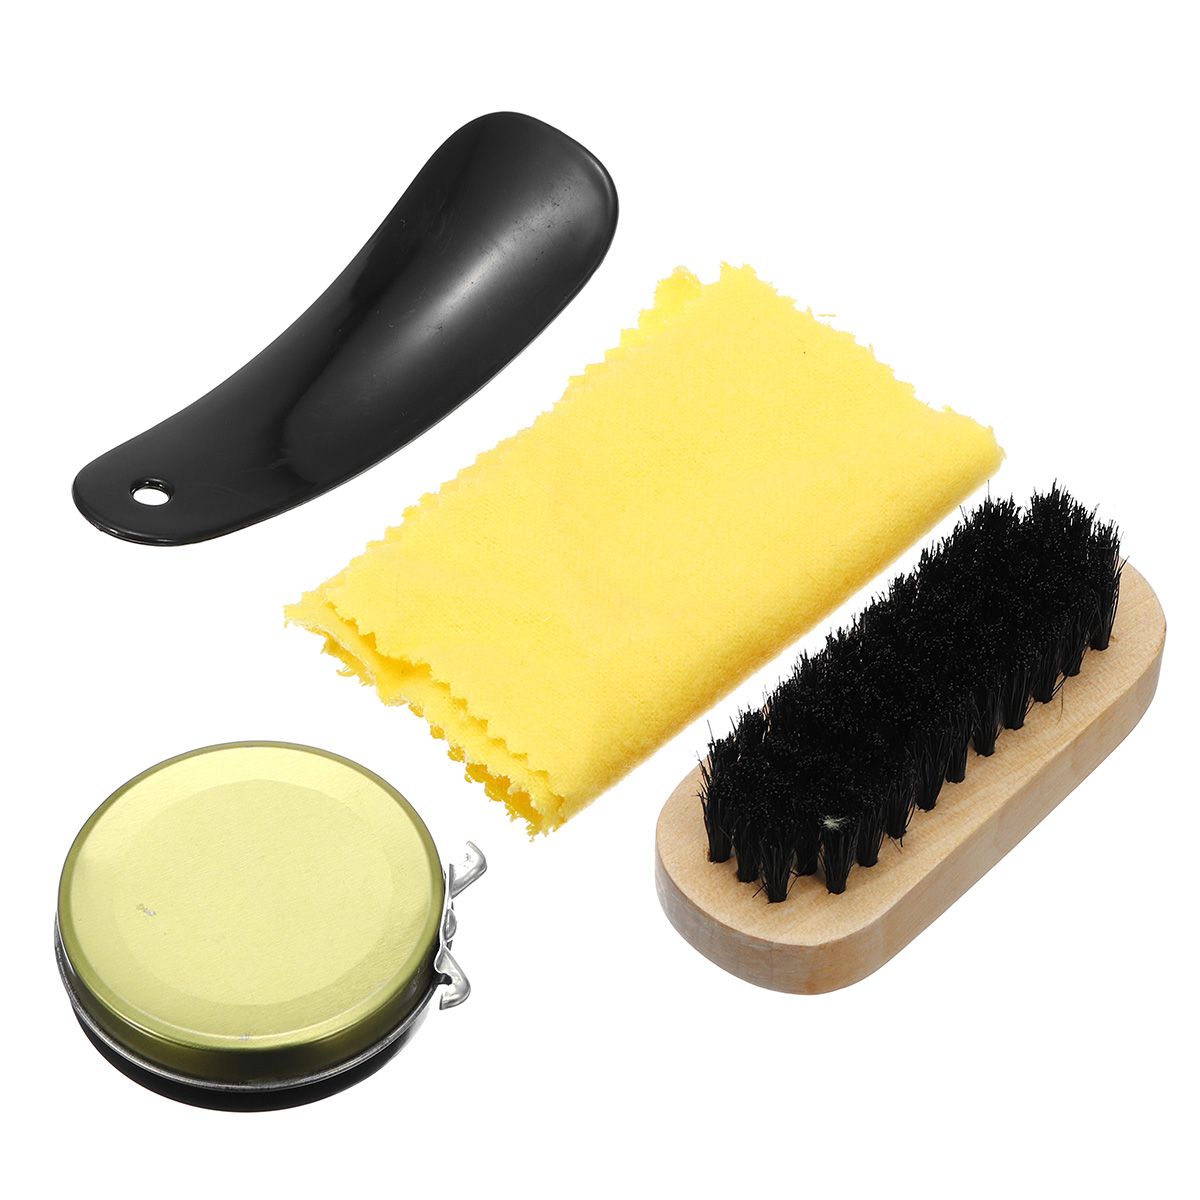 4-In-1-Shoe-Shine-Care-Kit-Set-Neutral-Polish-Brush-Leather-Shoes-Boots--Case-Shoes-Accessories-1278698